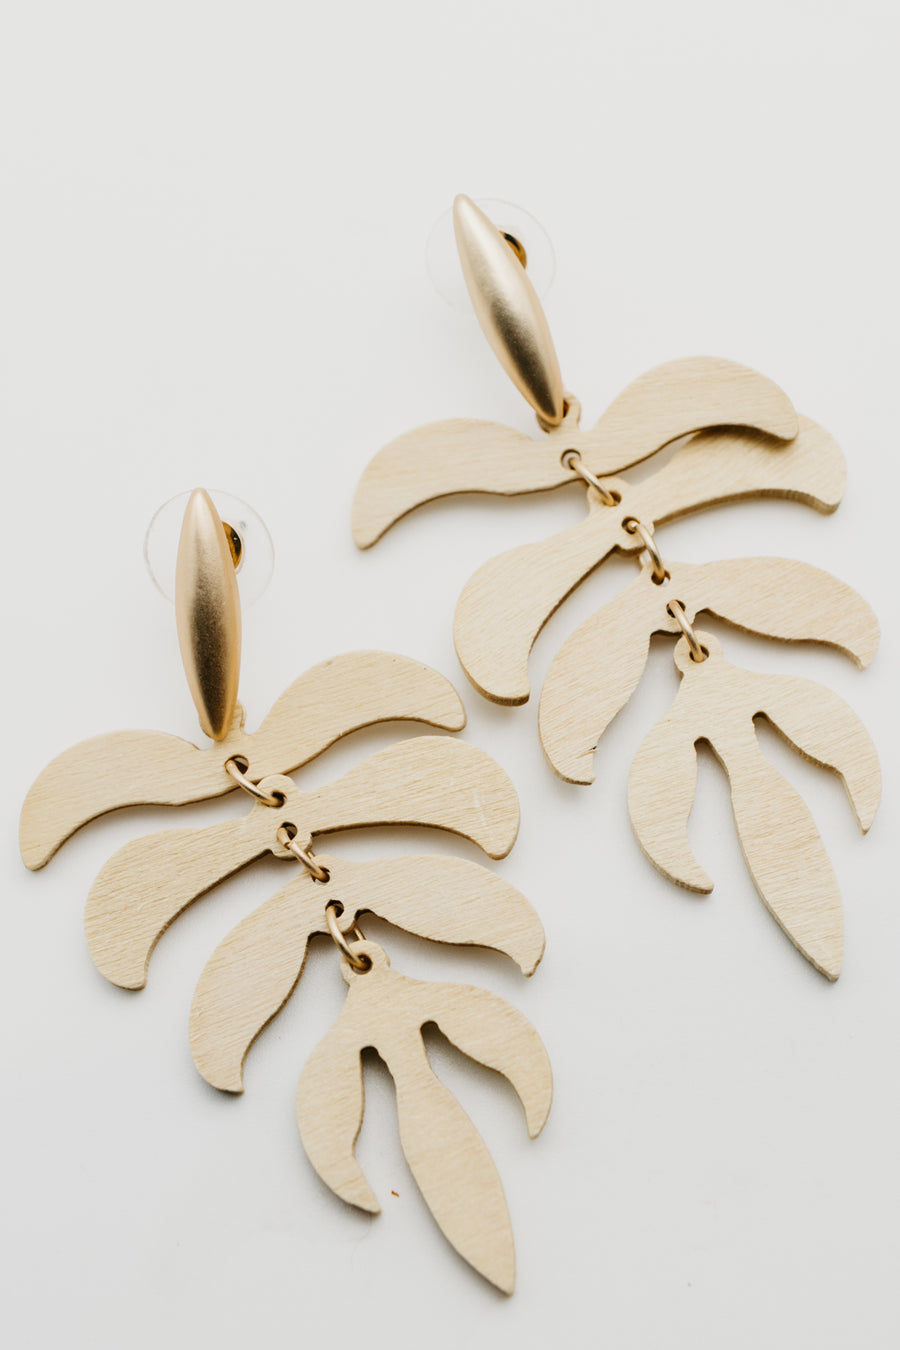 The Constance Wood Leaf Earring